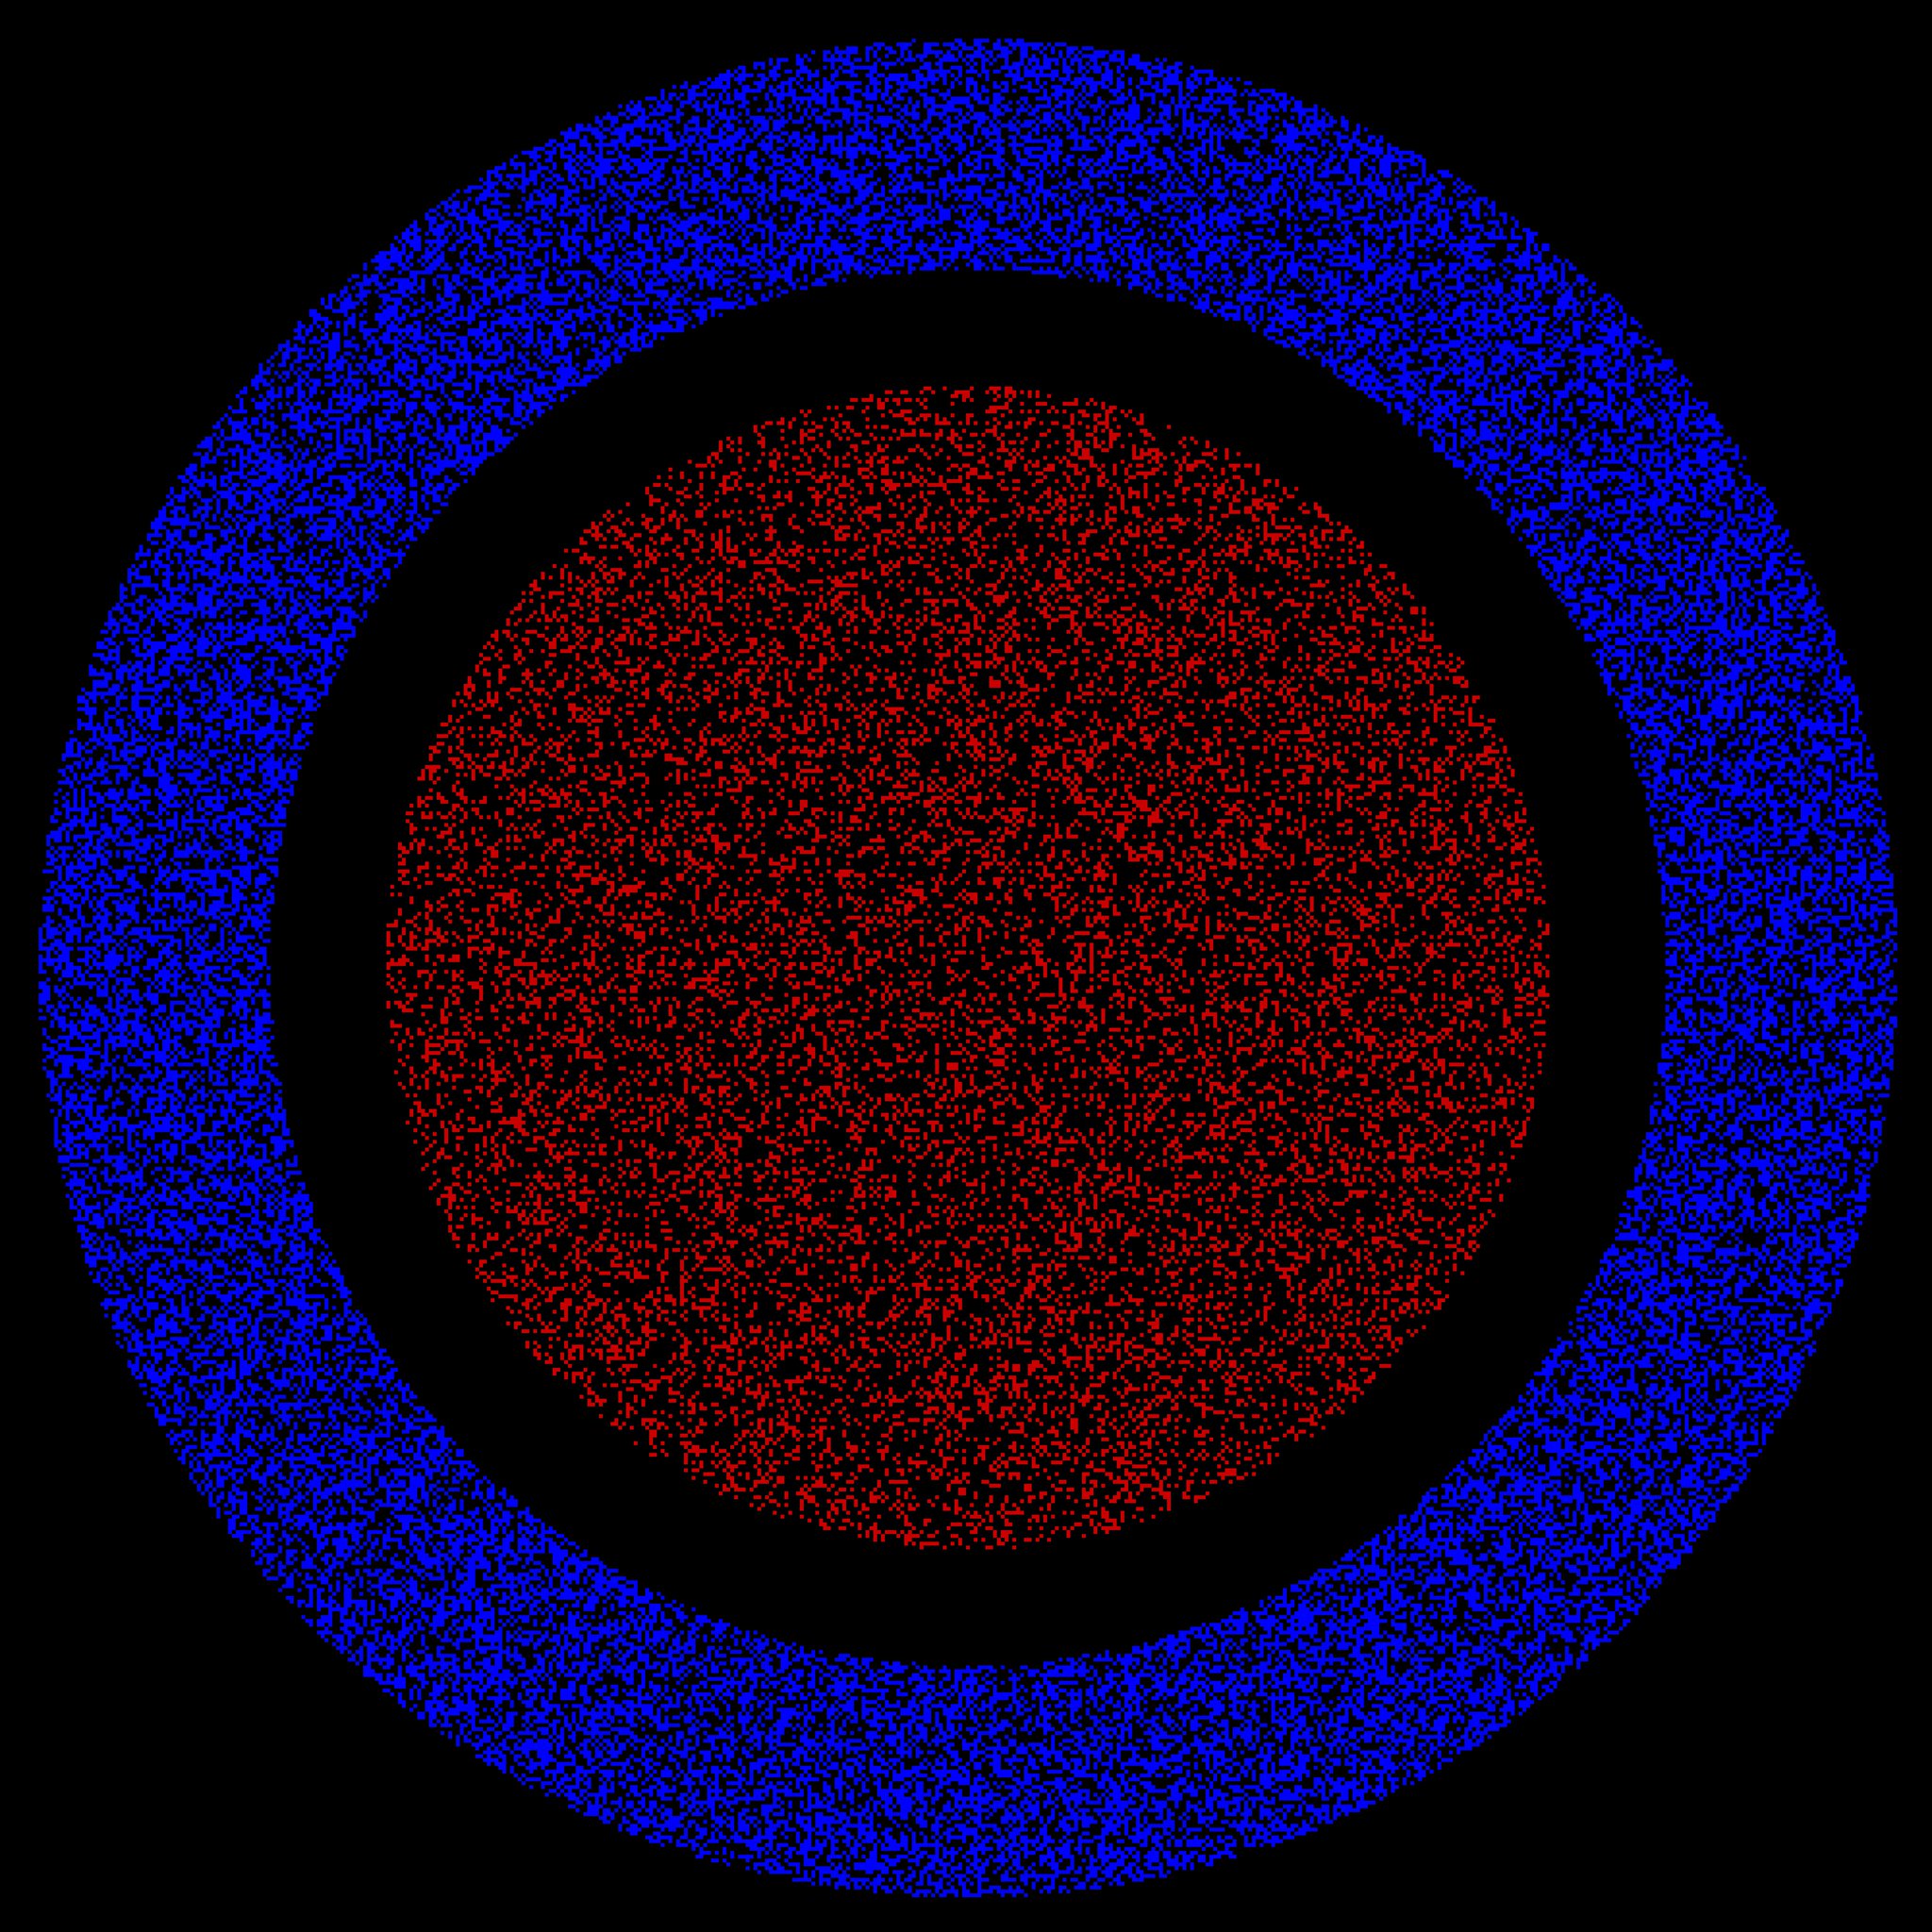 Akiyoshi Kitaoka on Twitter: "Some observers see red in front of blue,  while others see blue in front of red. (chromostereopsis)  https://t.co/FTNqQWxkly" / Twitter